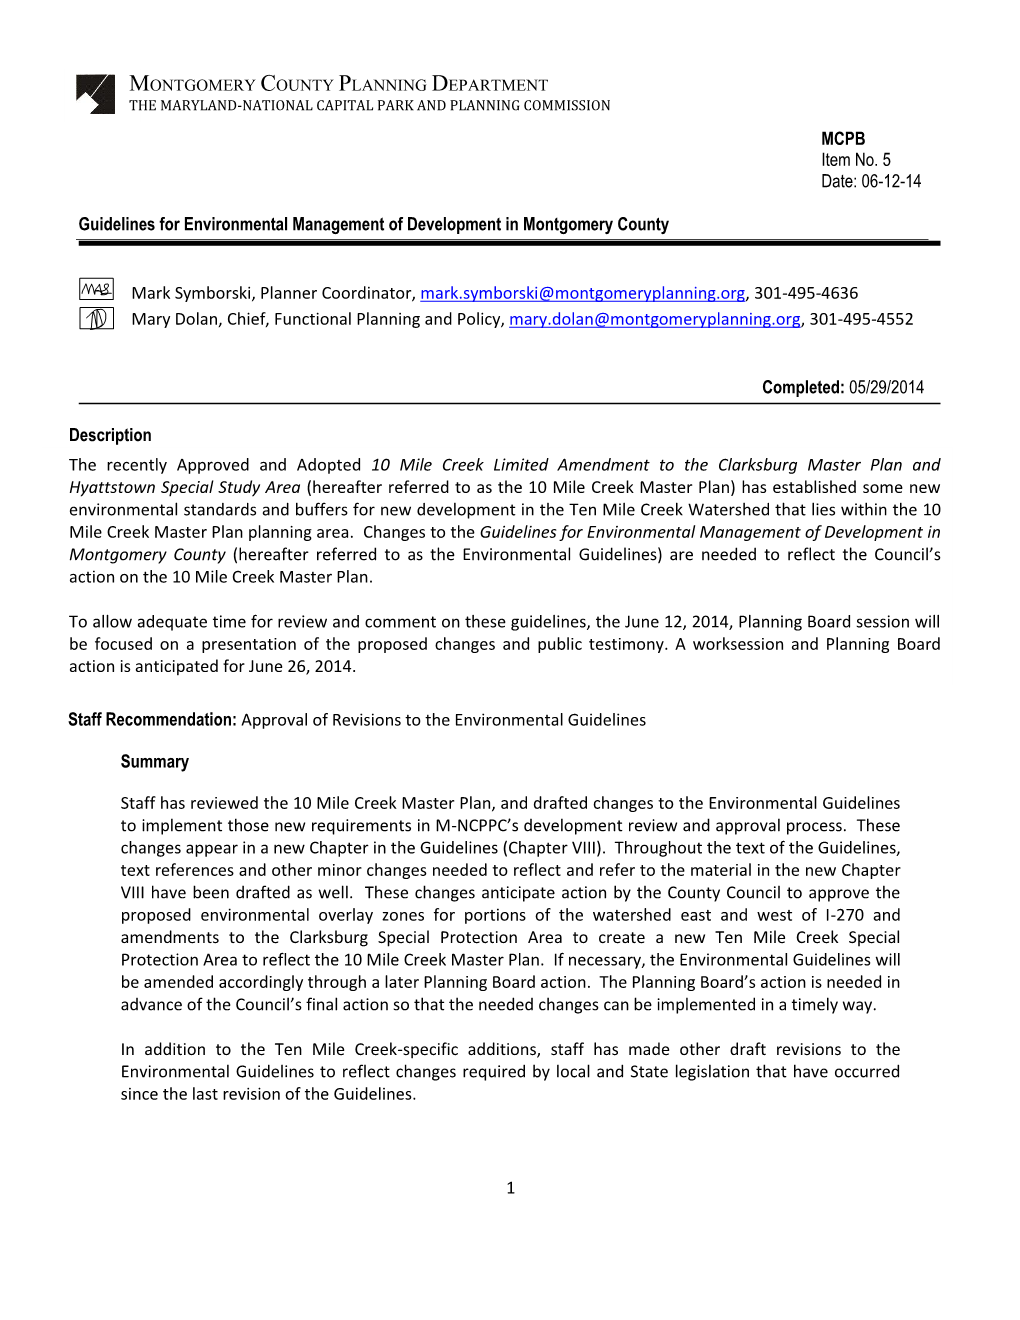 Guidelines for Environmental Management of Development in Montgomery County